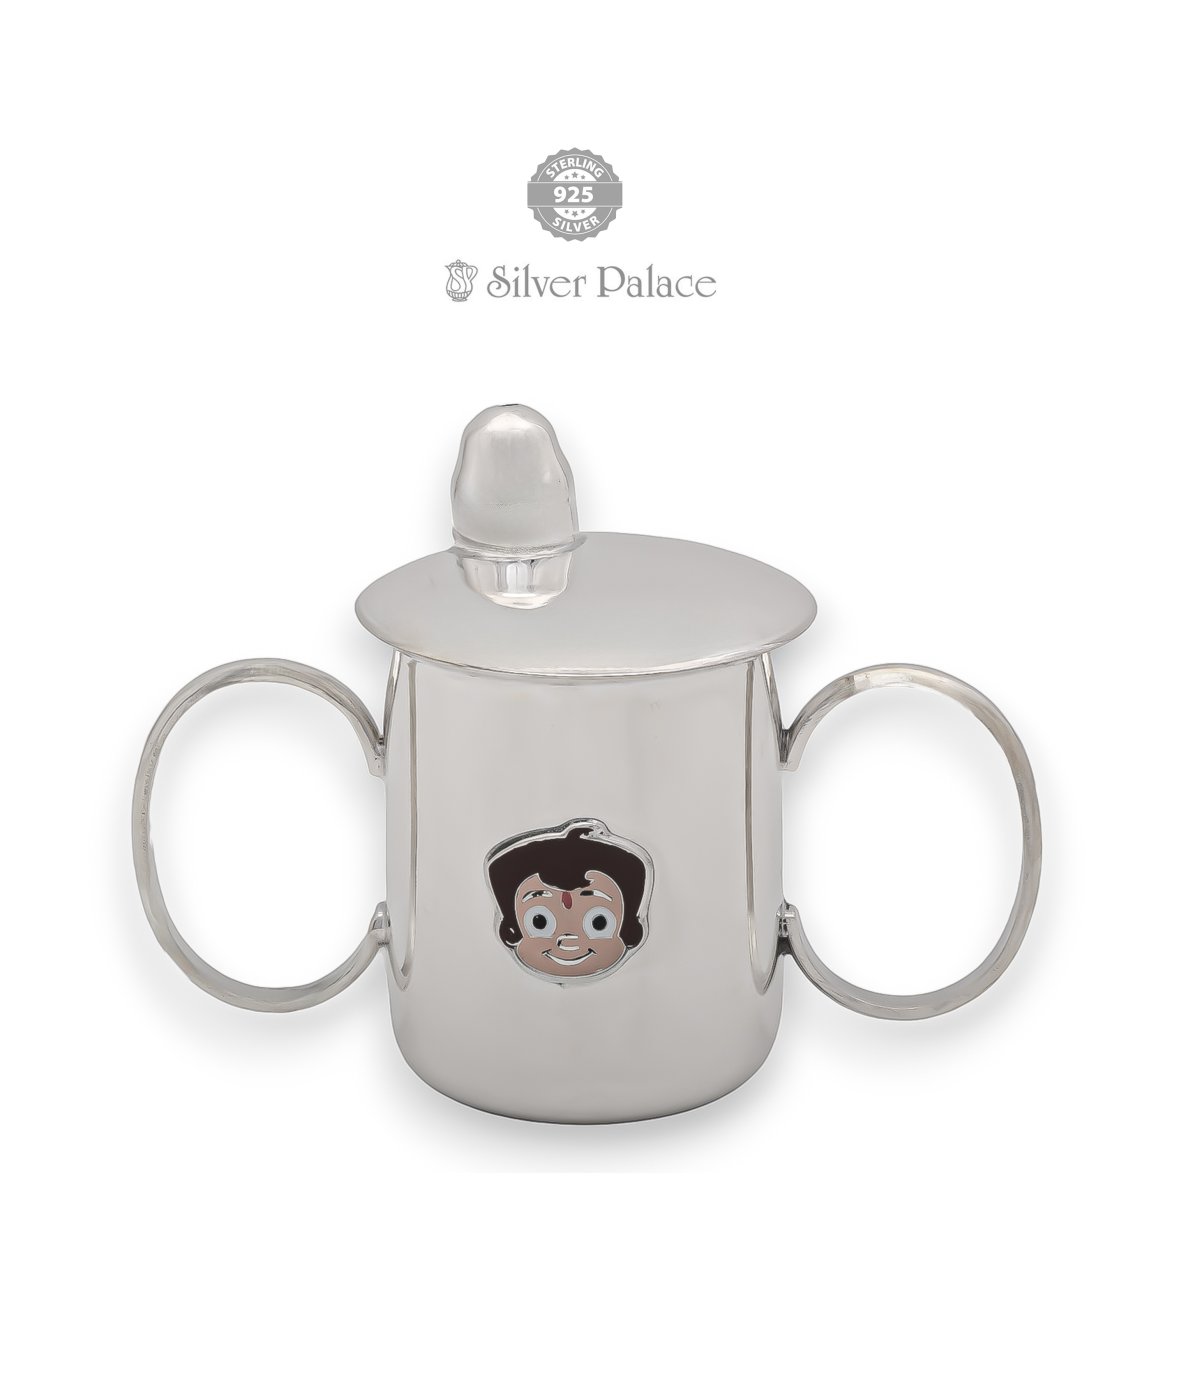 92.5 SILVER BHEEM DESIGN  BABY SIPPER GLASS  FOR KIDS